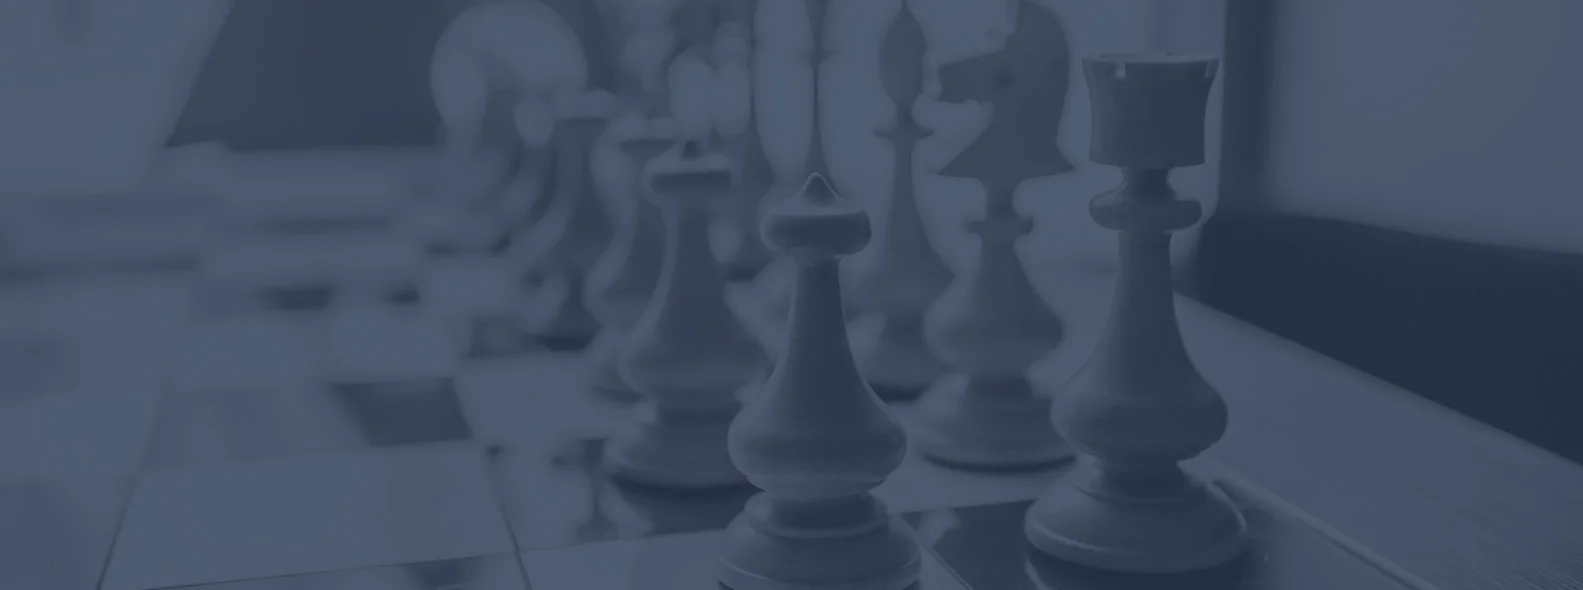 Chess pieces showing due diligence services are your next move for developing a business valuation